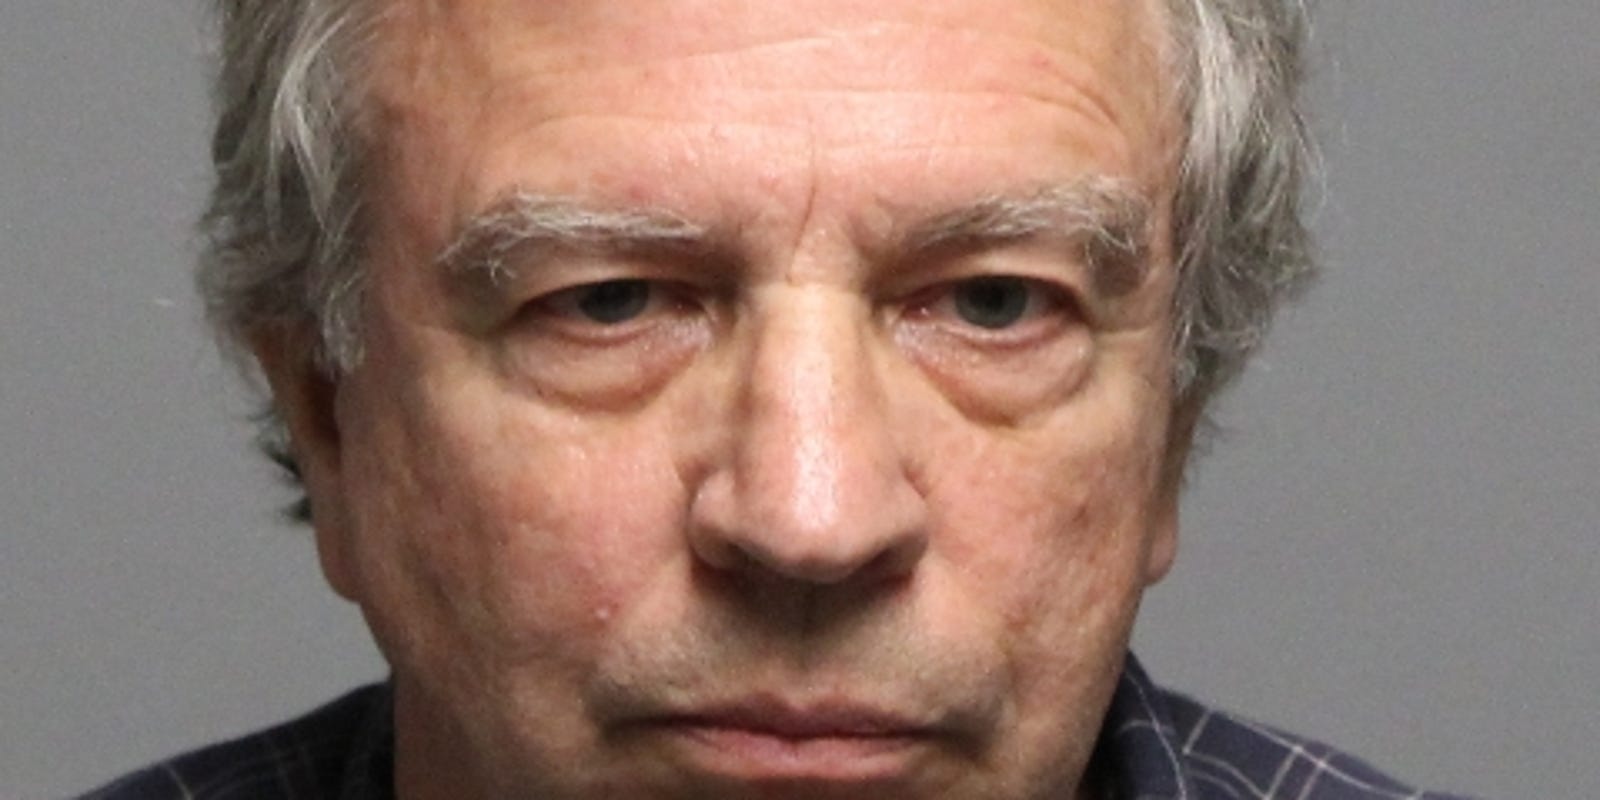 1419px x 800px - Hunterdon County NJ man, 70, charged with child porn possession